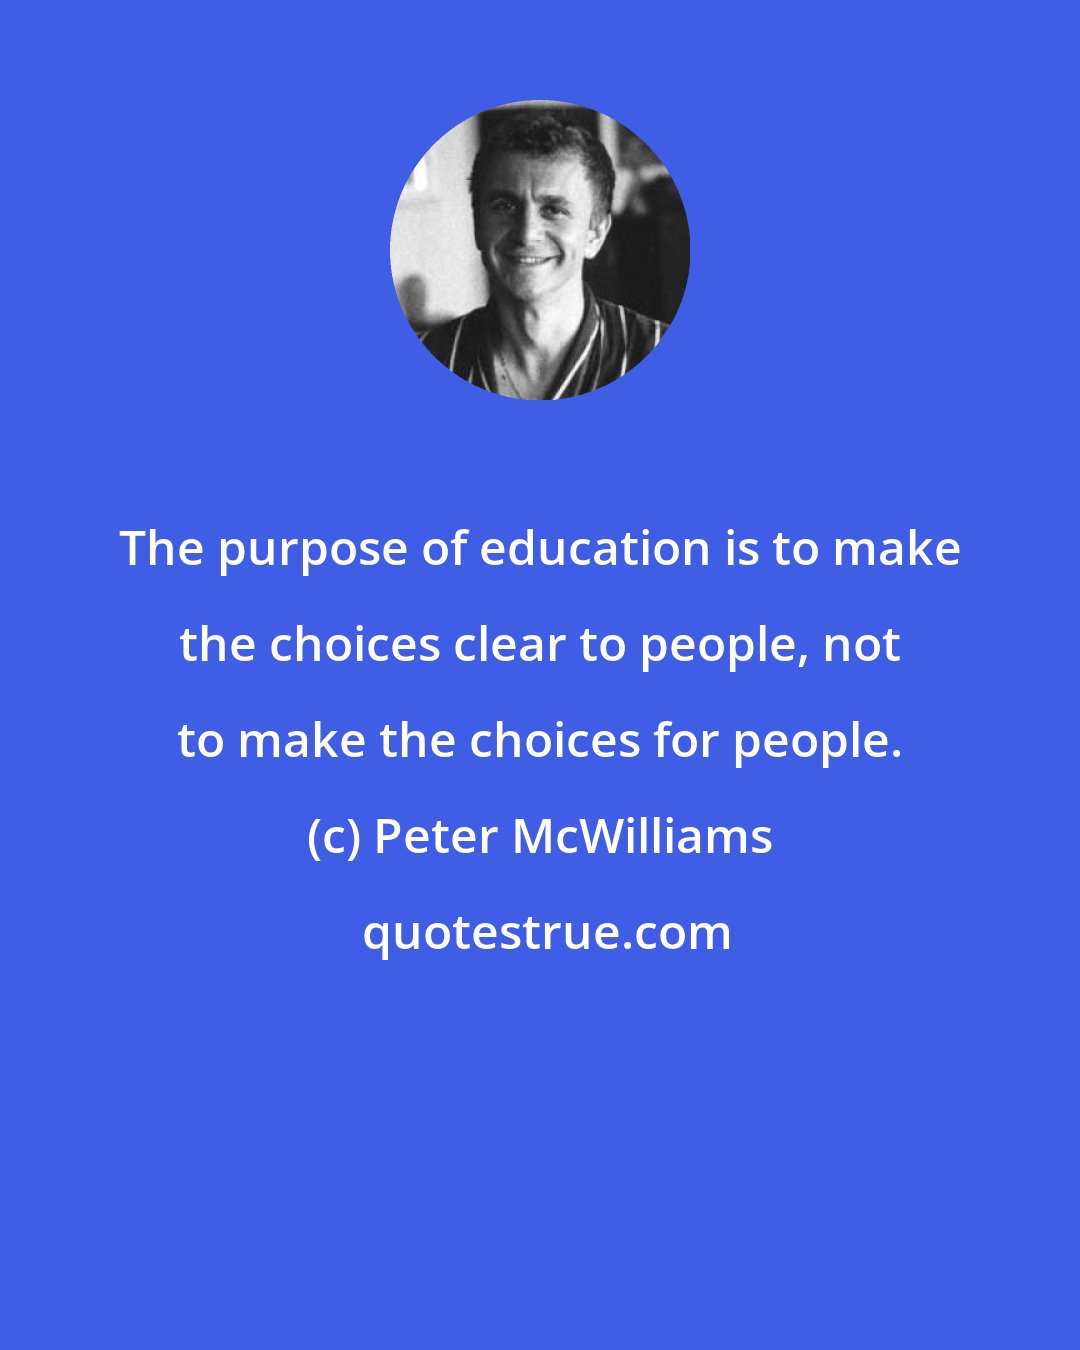 Peter McWilliams: The purpose of education is to make the choices clear to people, not to make the choices for people.